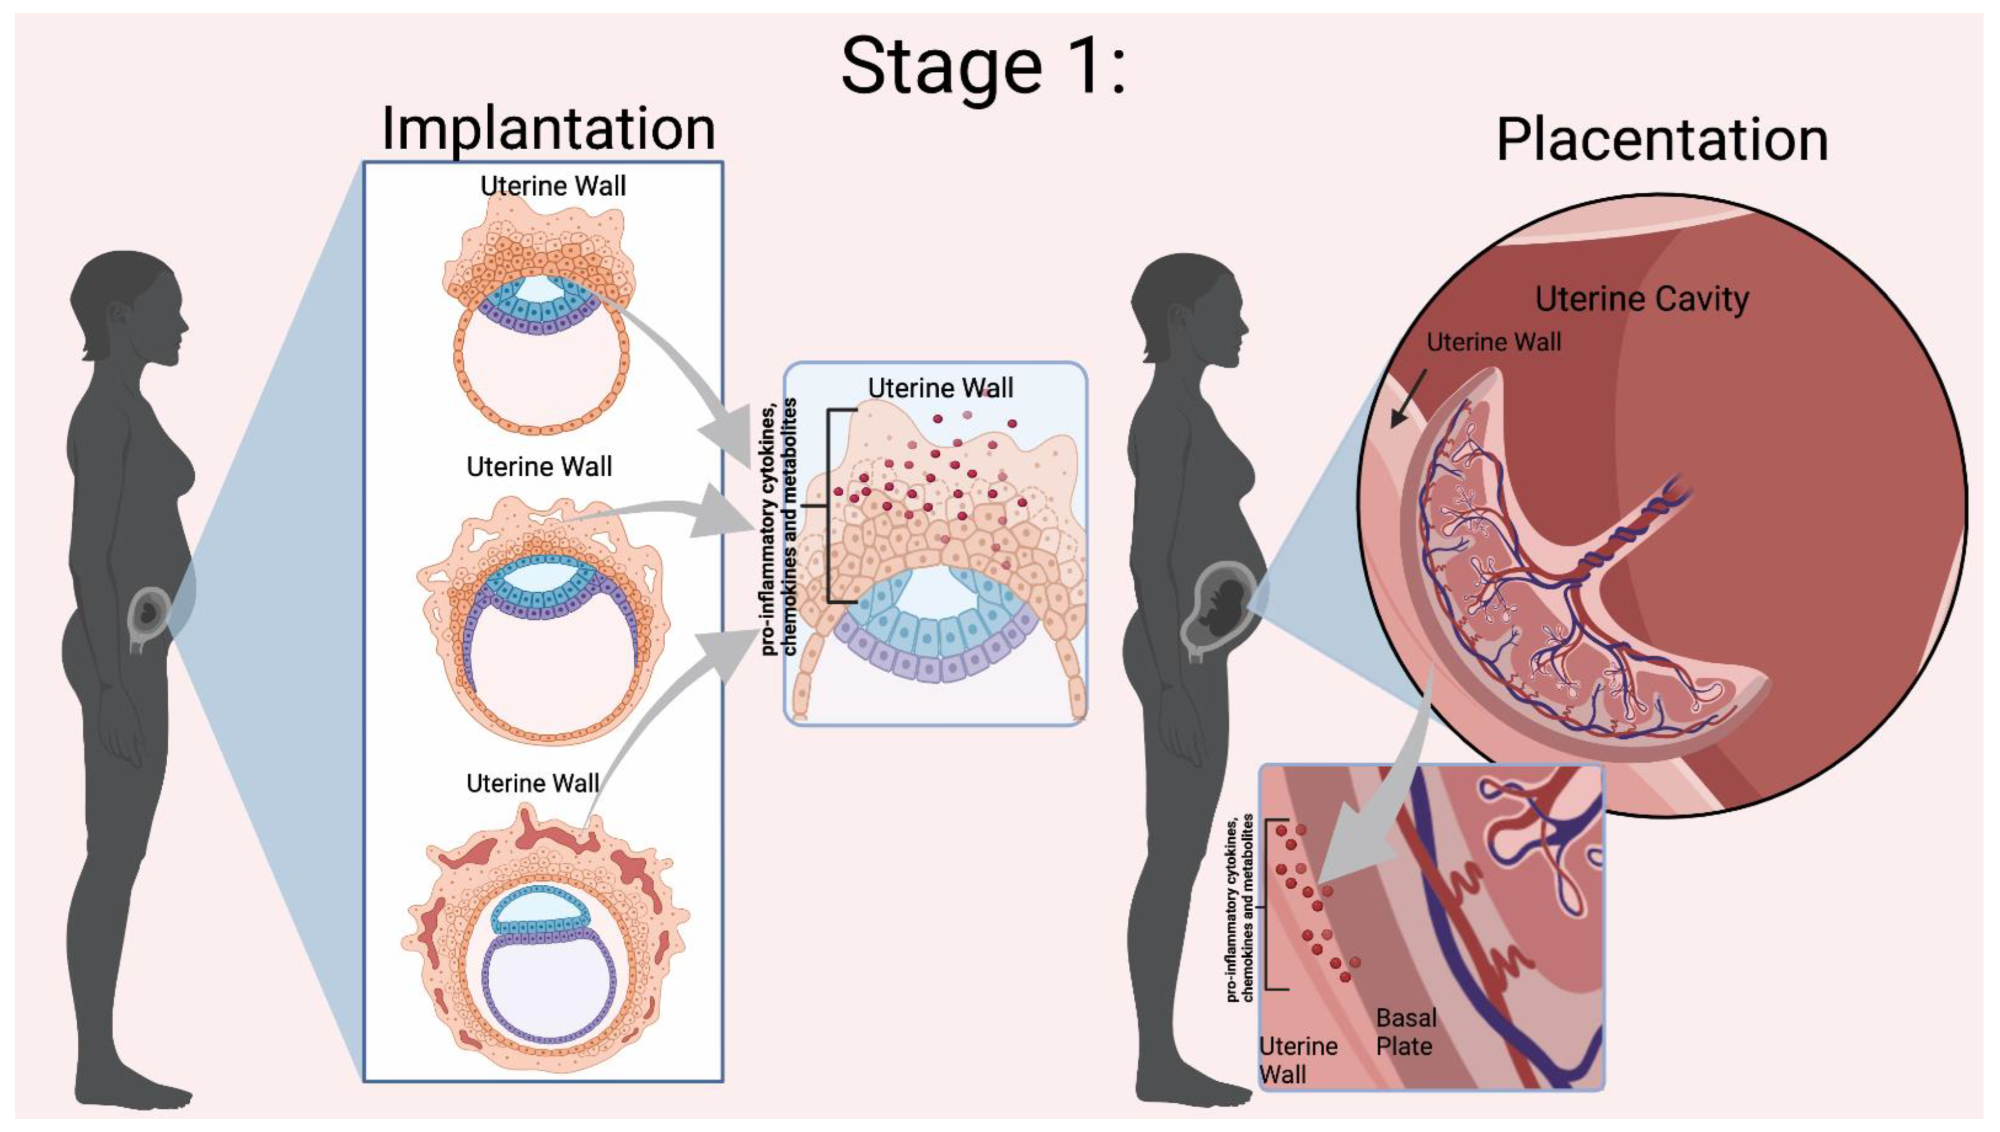 Mo et al. Stage 1 of immunological events that occur during pregnancy. Implantation is dependent on the presence of proinflammatory cytokines, chemokines and other mediators that invade the uterine wall. During placentation, there is a dynamic relationship between the uterine wall and the placenta for trophoblast differentiation and proper placental development. Inflammation is indicated by red dots in the figure.  Diagram created with BioRender.